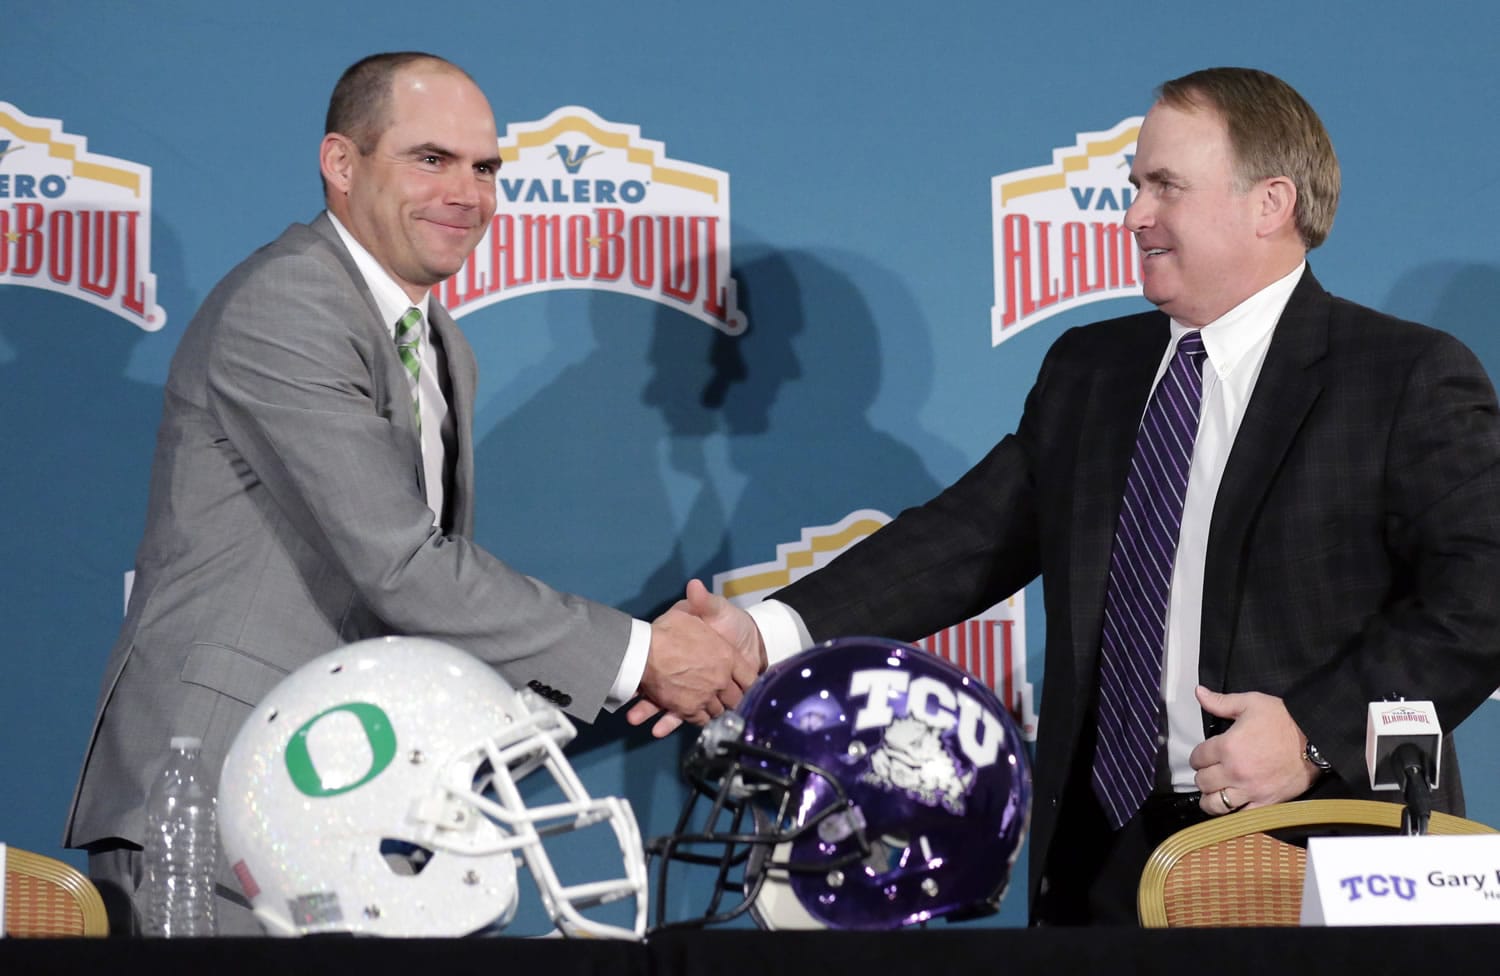 Oregon head coach Mark Helfrich, left, and TCU head coach Gary Patterson, right, shake hands following a news conference for the Alamo Bowl NCAA college football game, Friday, Jan. 1, 2016, in San Antonio. The two teams meet on Saturday.